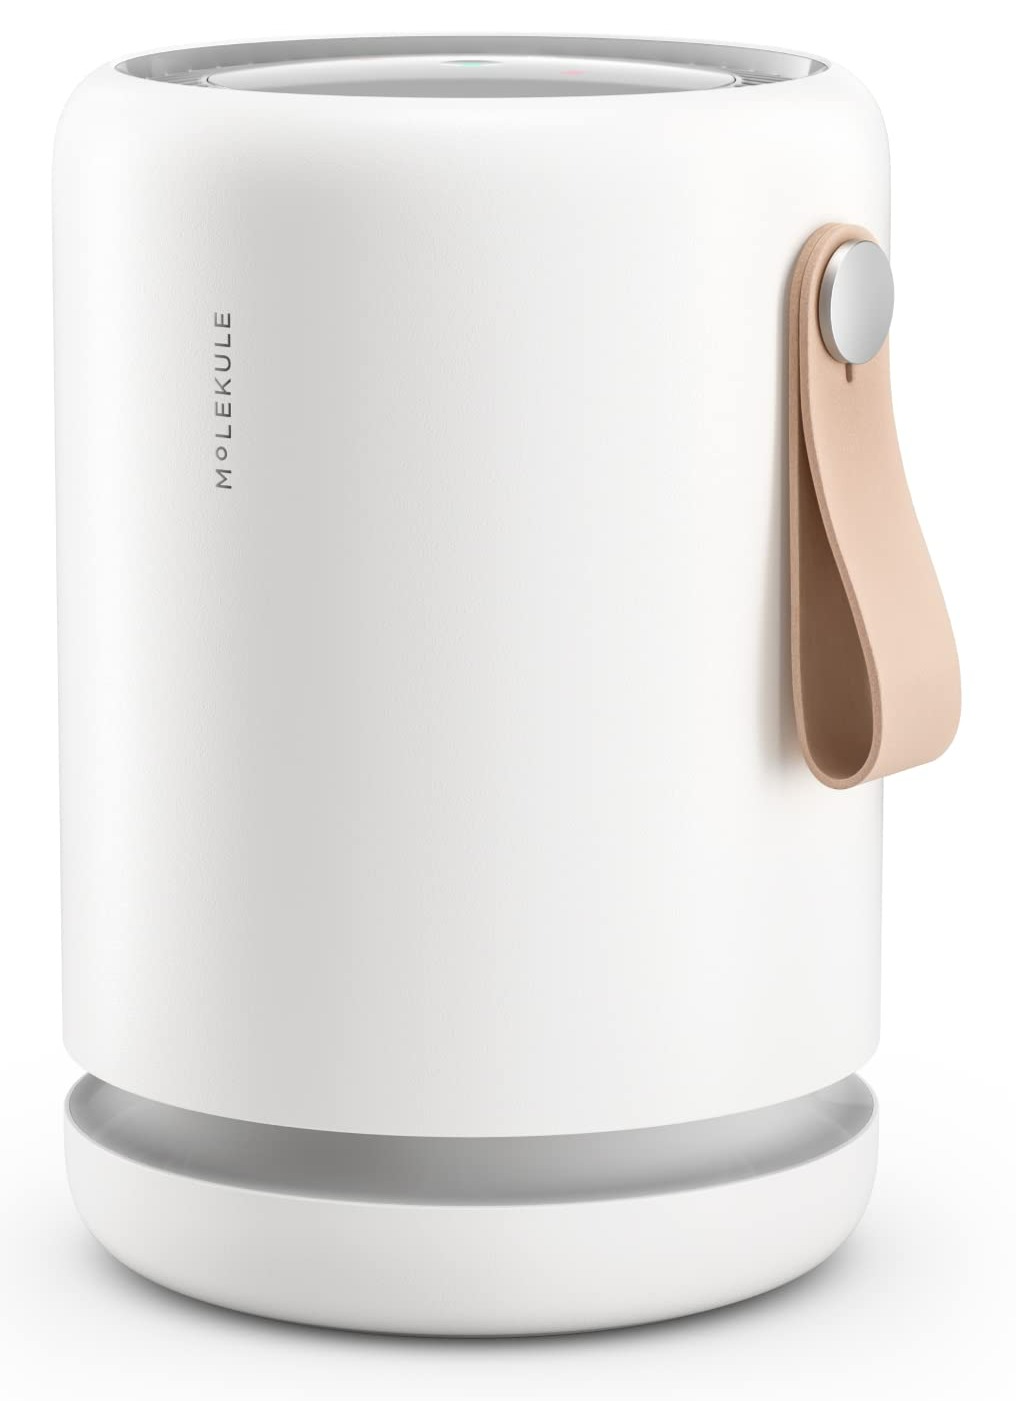 Molekule Air Mini+ | Air Purifier for Small Home Rooms with PECO-HEPA Tri-Power Filter for Mold, Smoke, Dust, Bacteria, Viruses & Pollutants for Clean Air, Alexa-Compatible $237.49